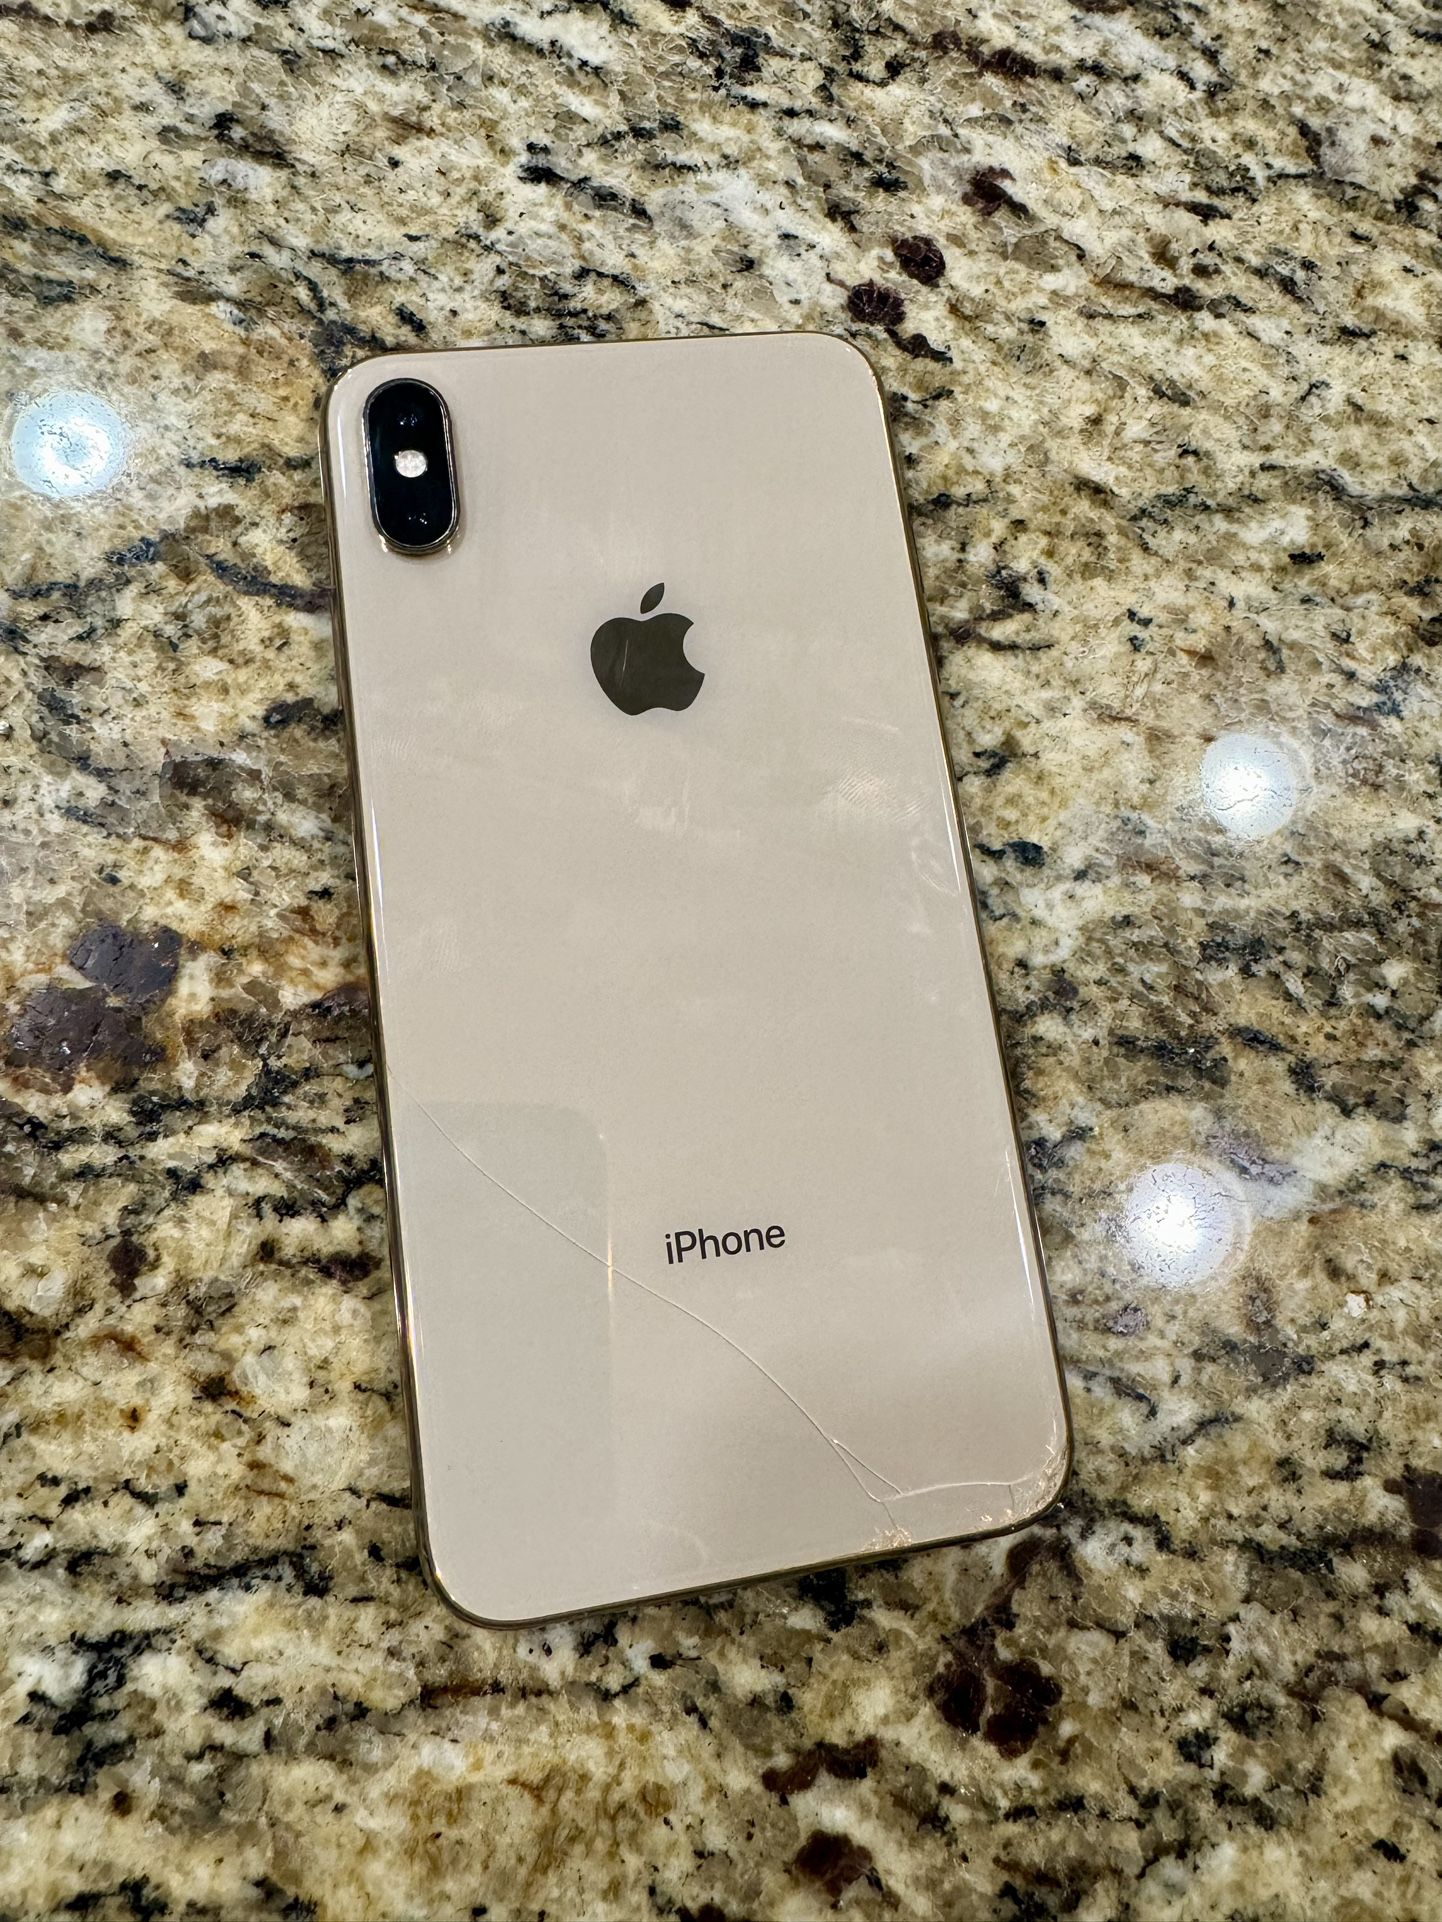 iPhone 10 XS Max Unlocked Any Carrier For Parts!!